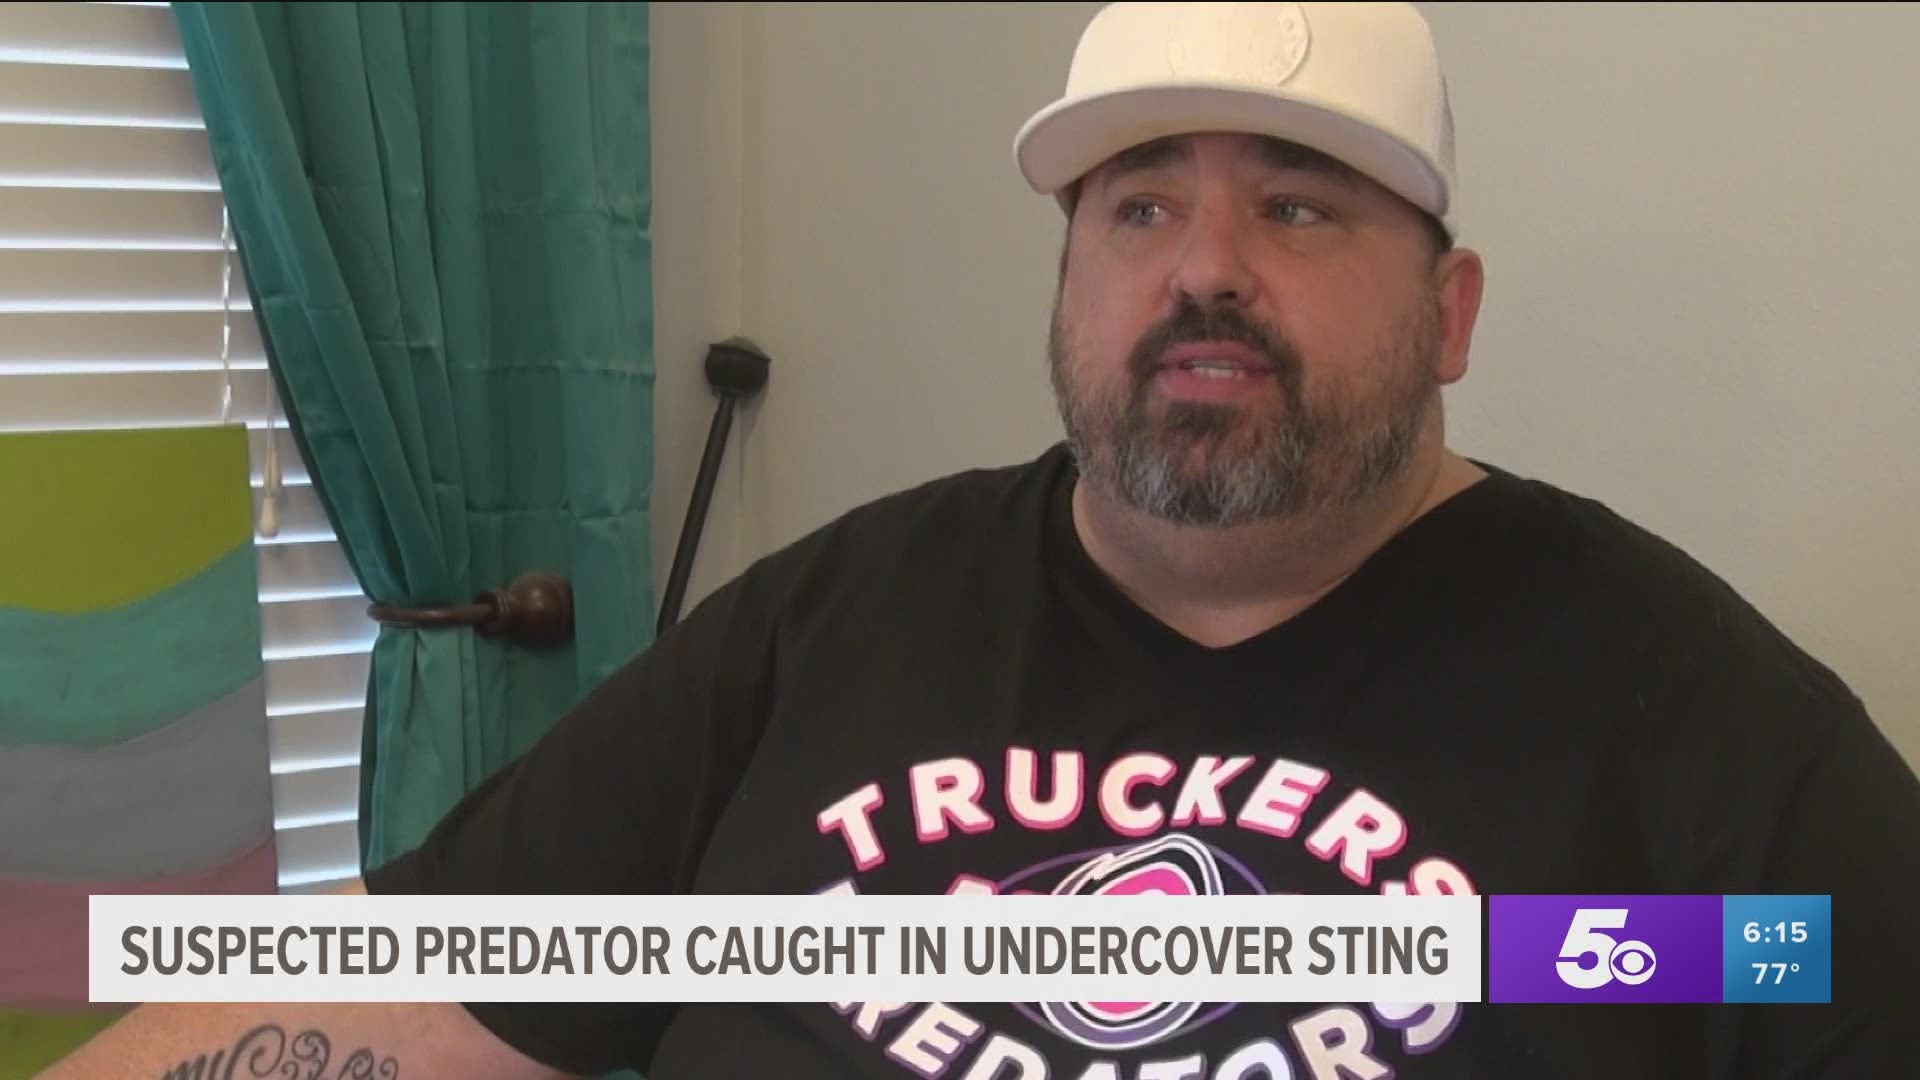 A group of truckers dedicated to helping combat child predators assisted police in capturing a potential suspect. https://bit.ly/3a74azJ